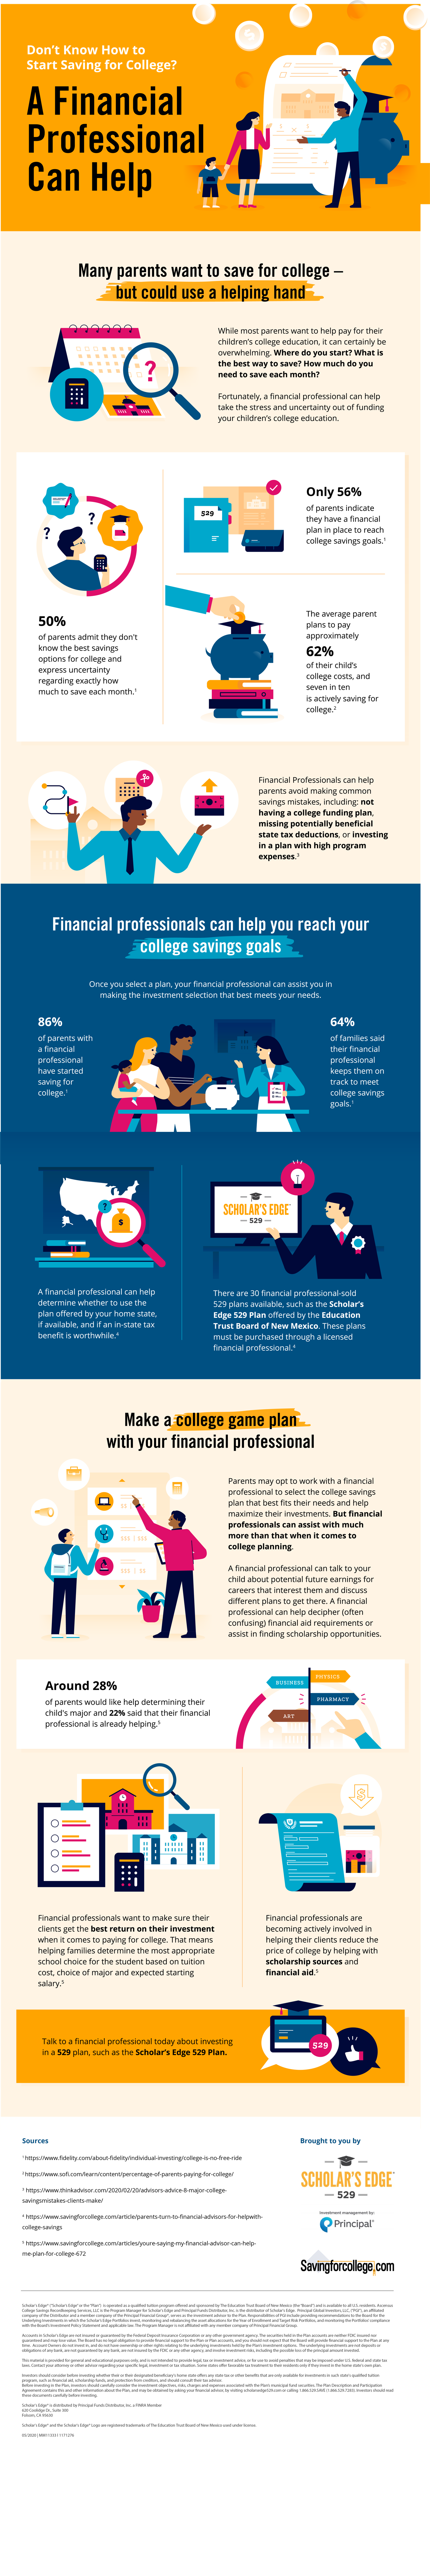 A Financial Advisor Can Help to Start Saving for College